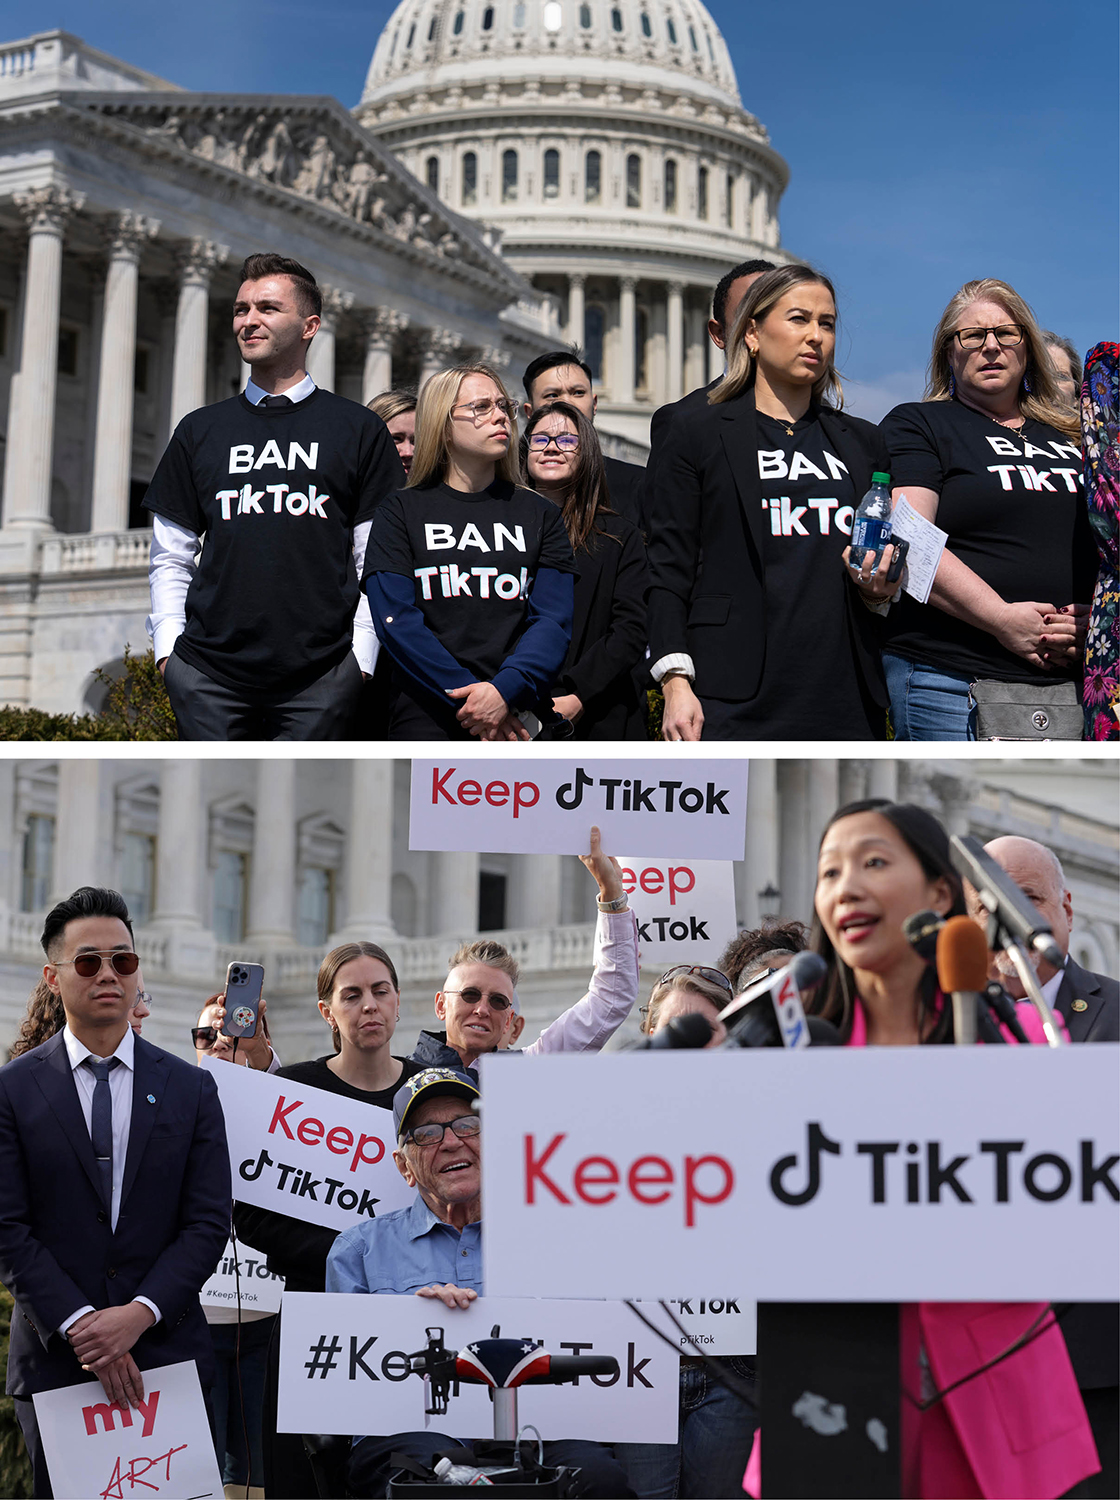 TikTok remains a pervasive presence in the political world, even as the prospect of a U.S. ban grows more realistic by the week.